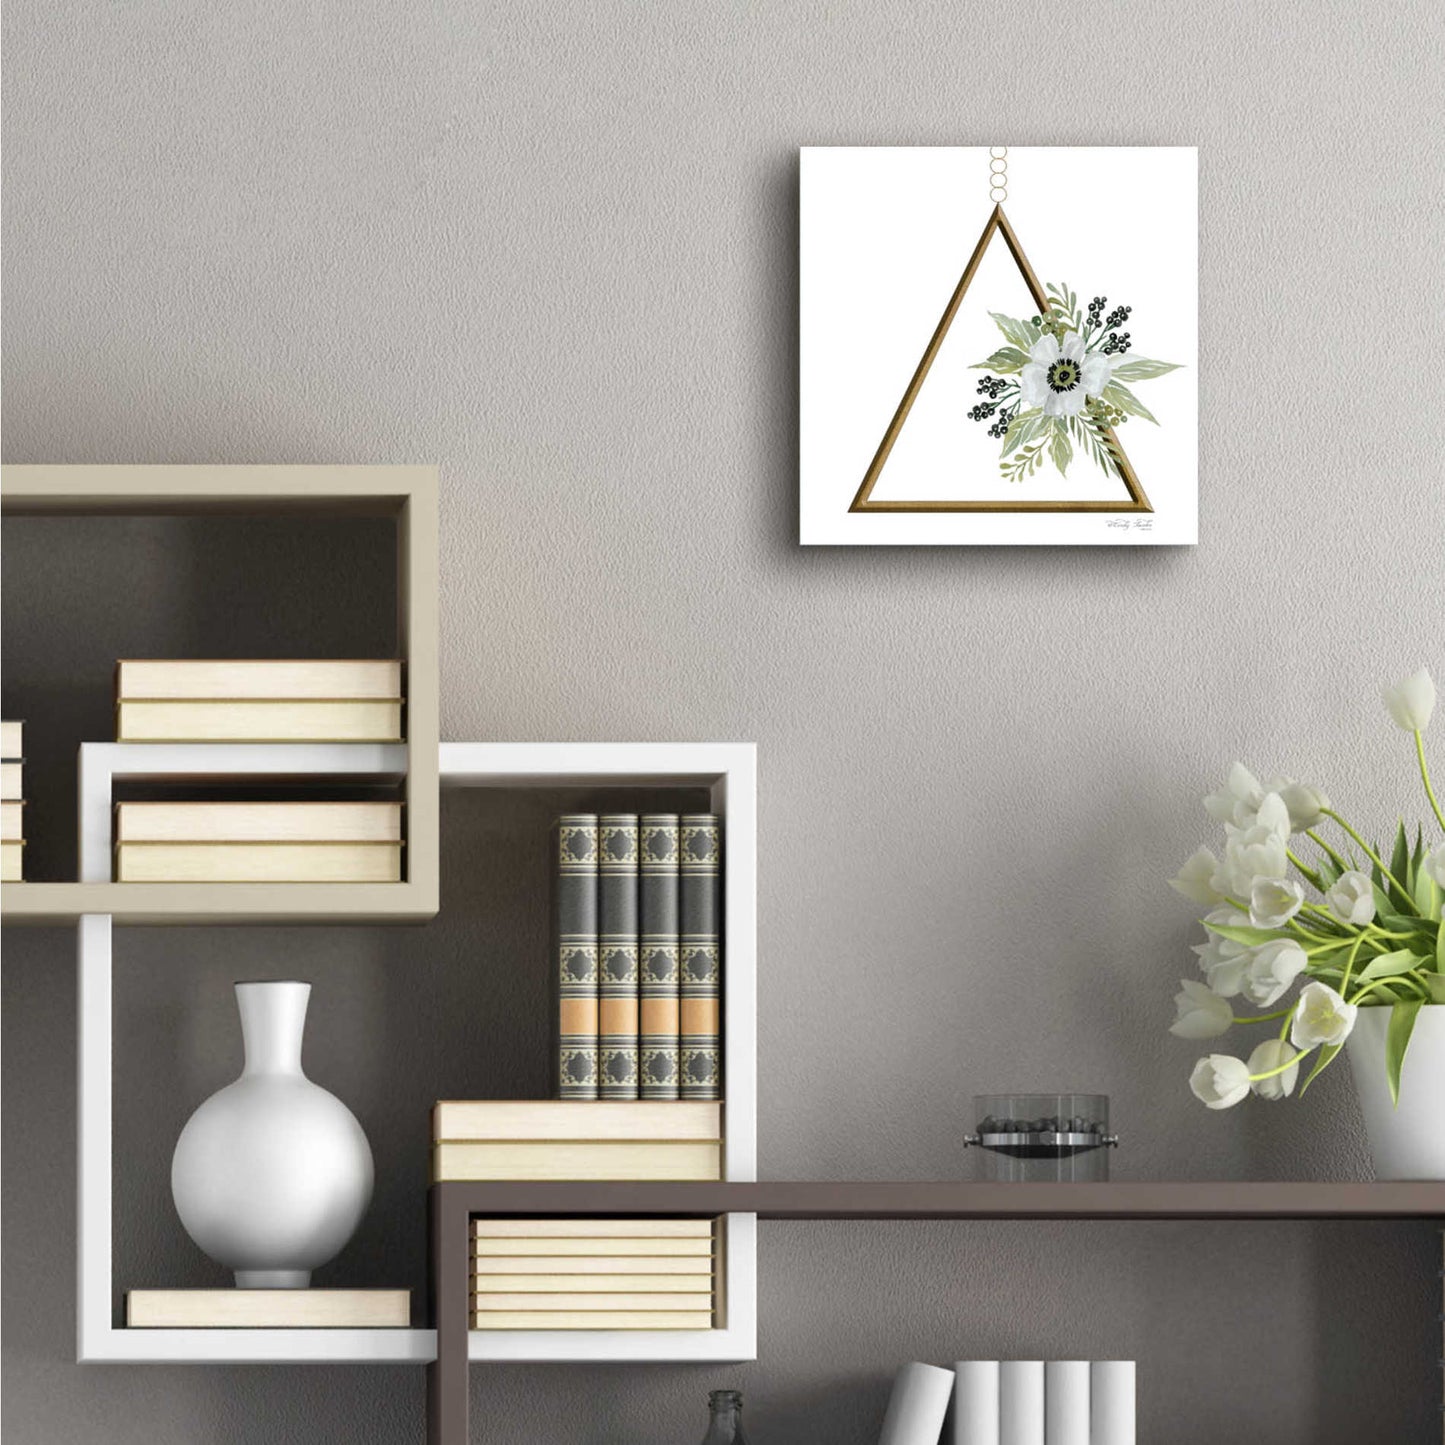 Epic Art 'Geometric Triangle Muted Floral II' by Cindy Jacobs, Acrylic Glass Wall Art,12x12